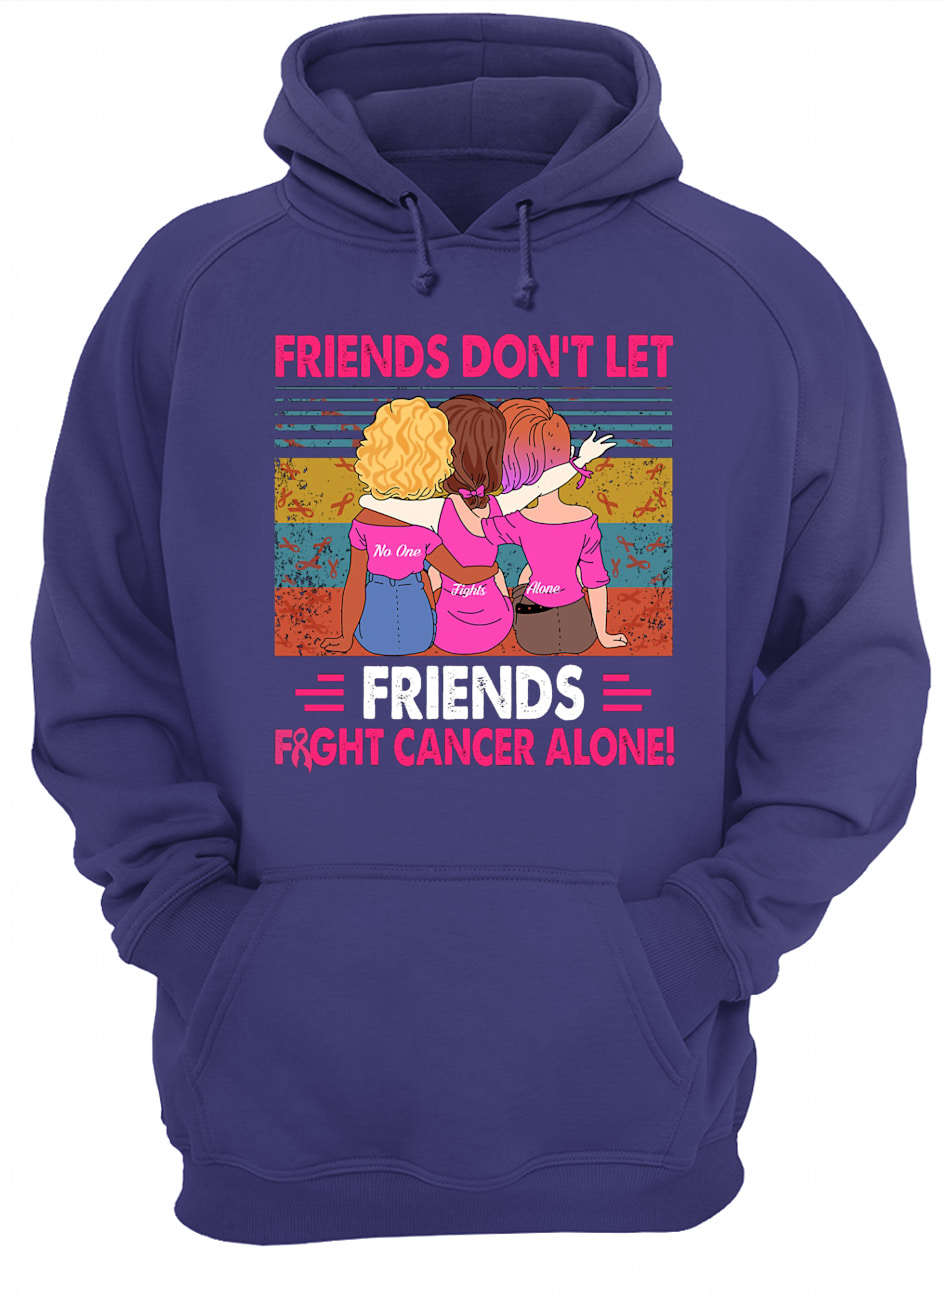 Vintage friends don't let friends fight cancer alone hoodie